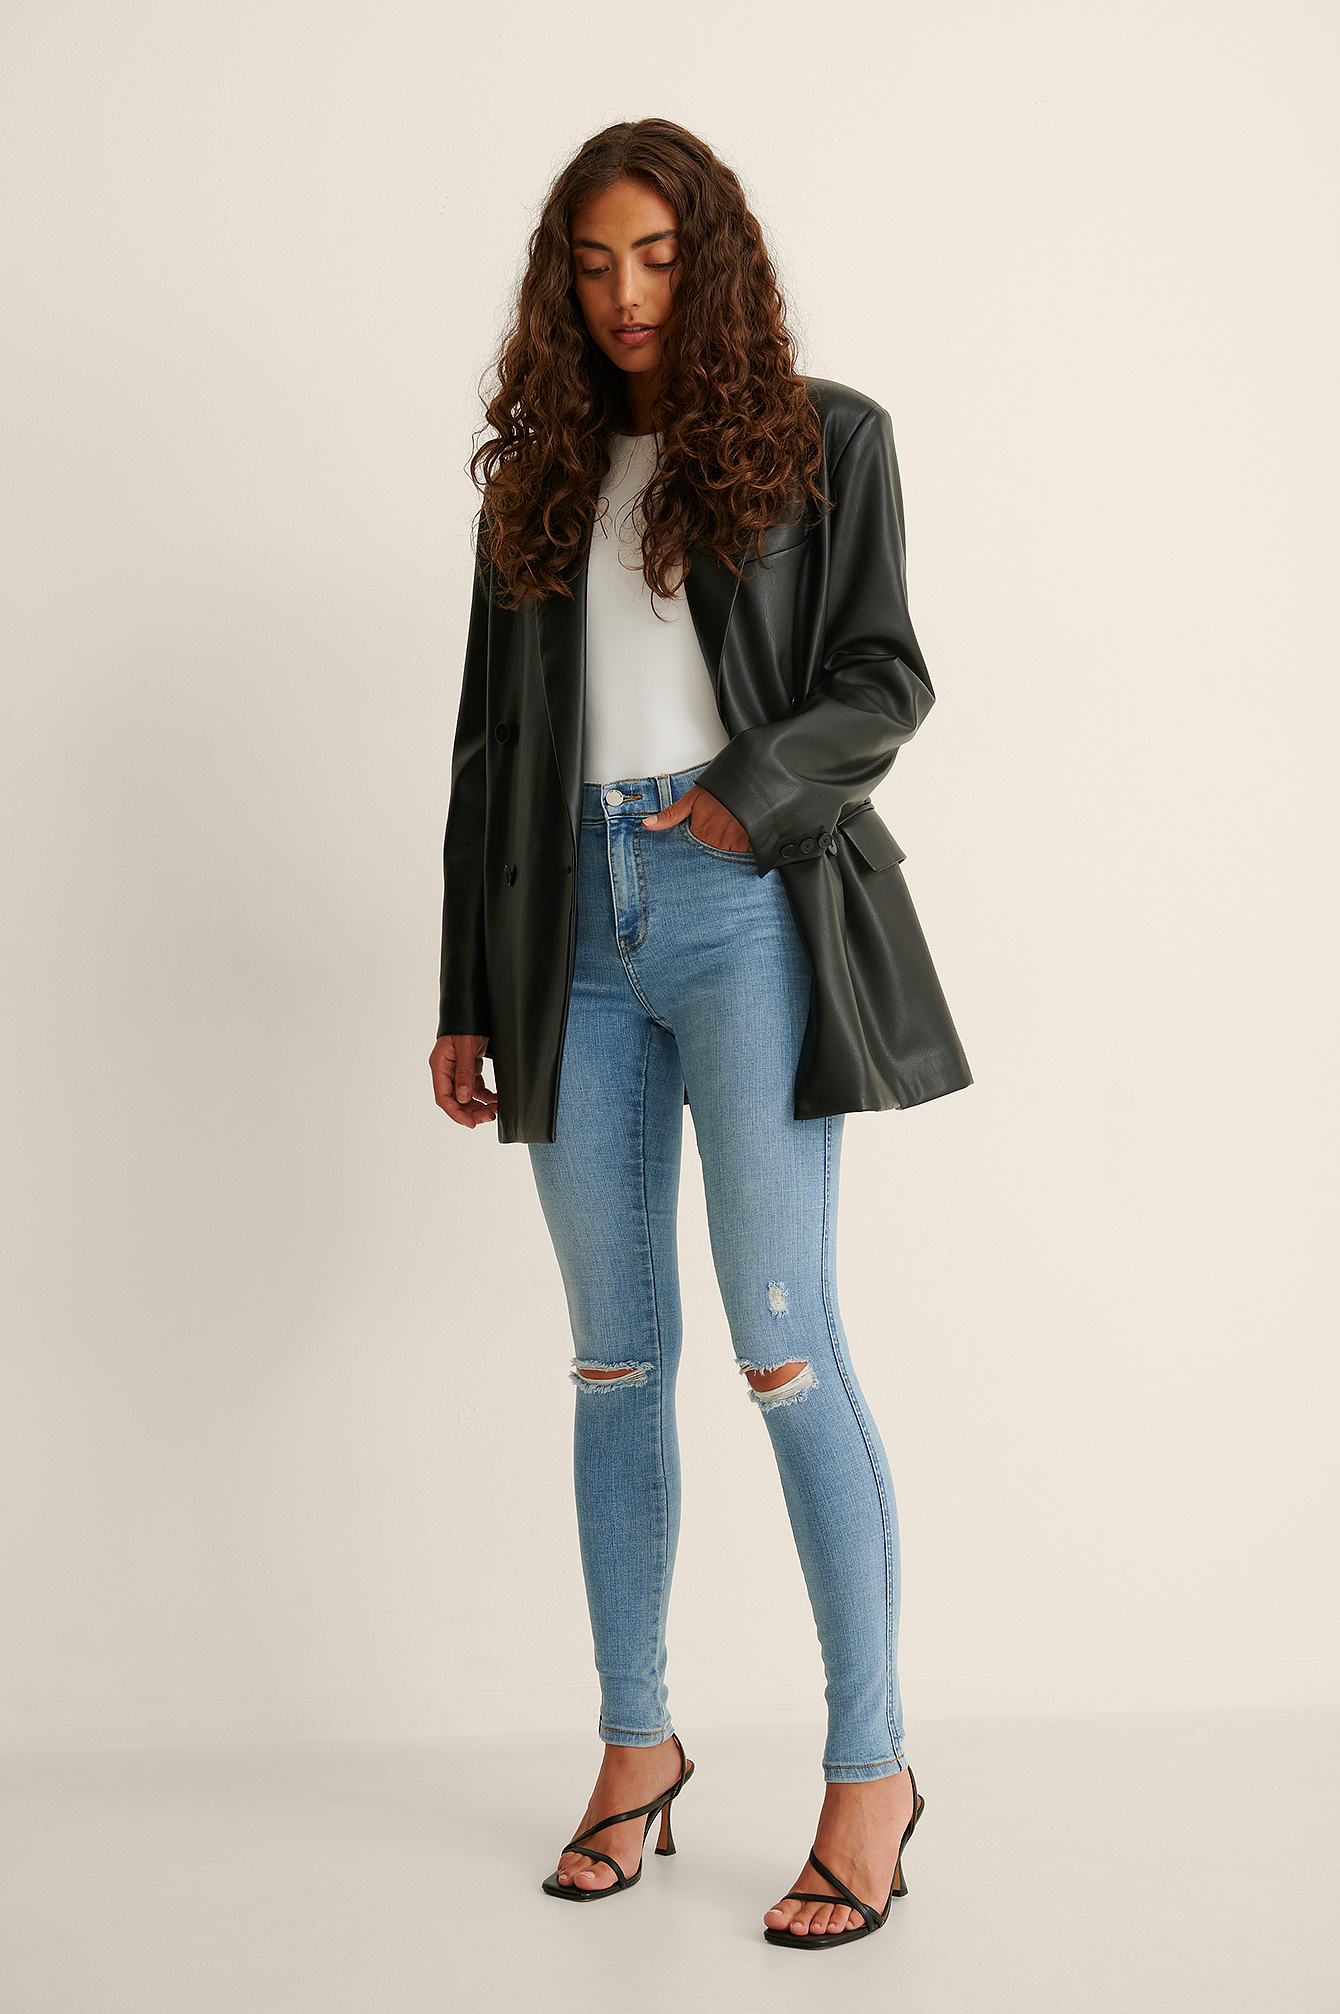 Lexy Jeans Outfit.